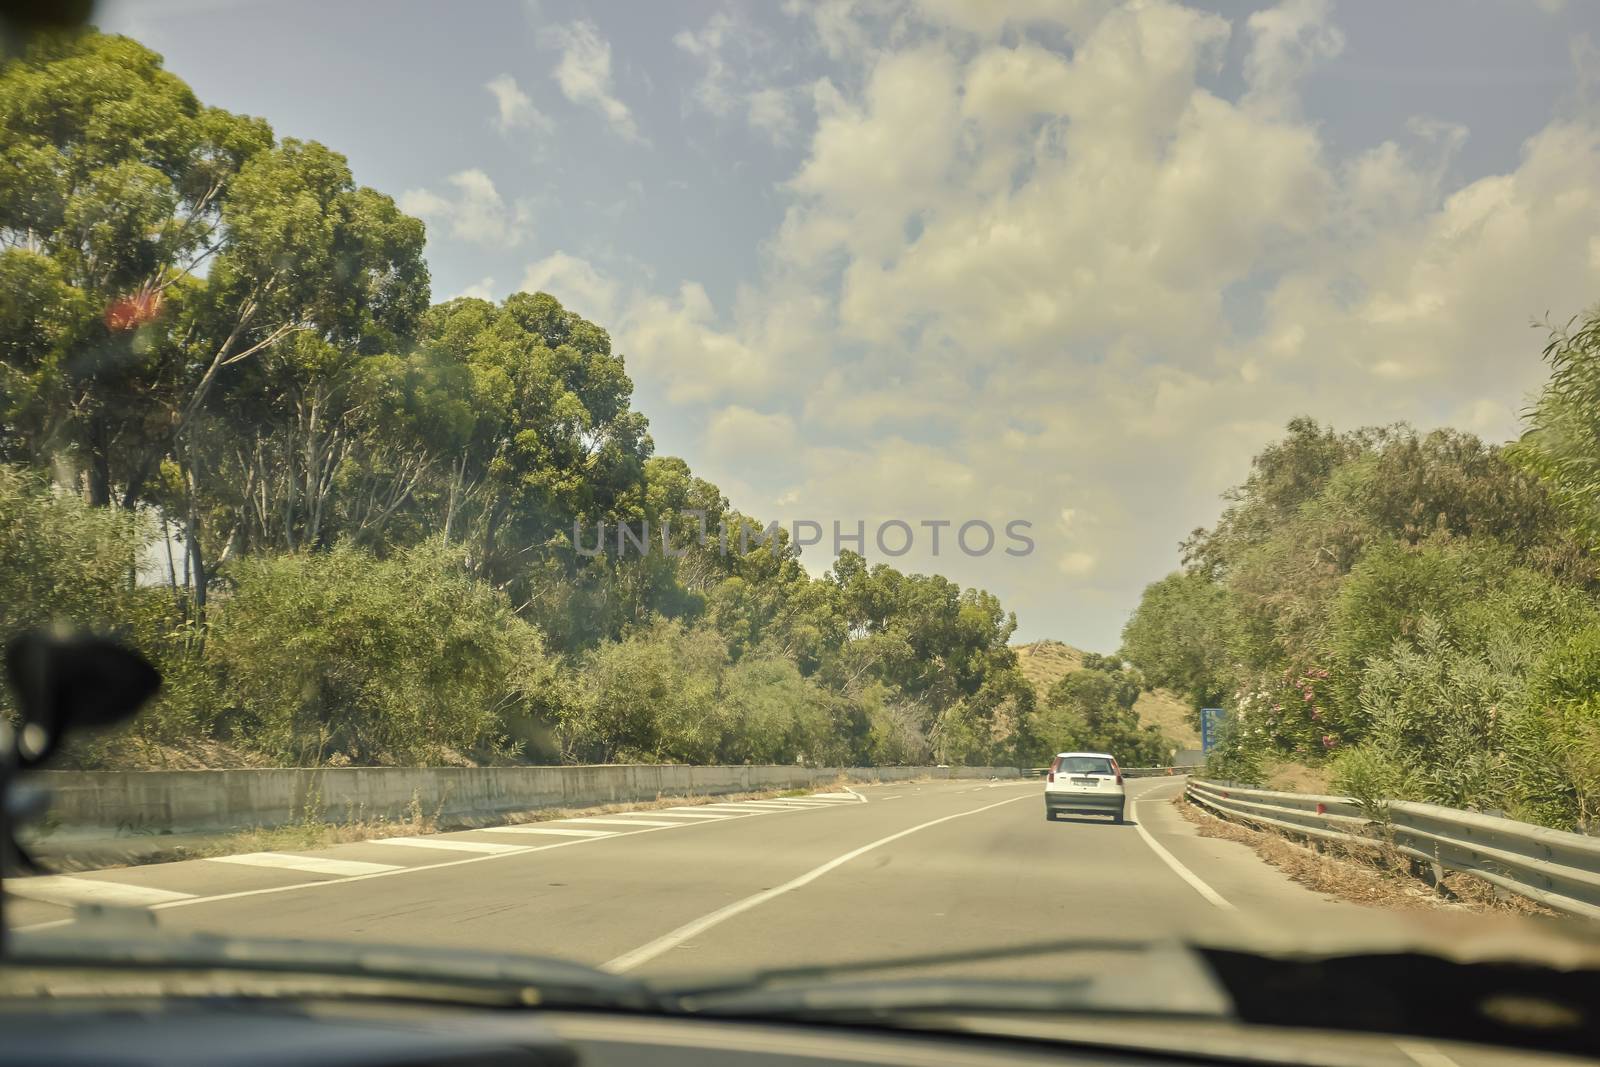 Drive on the road with a car in the street full of trees